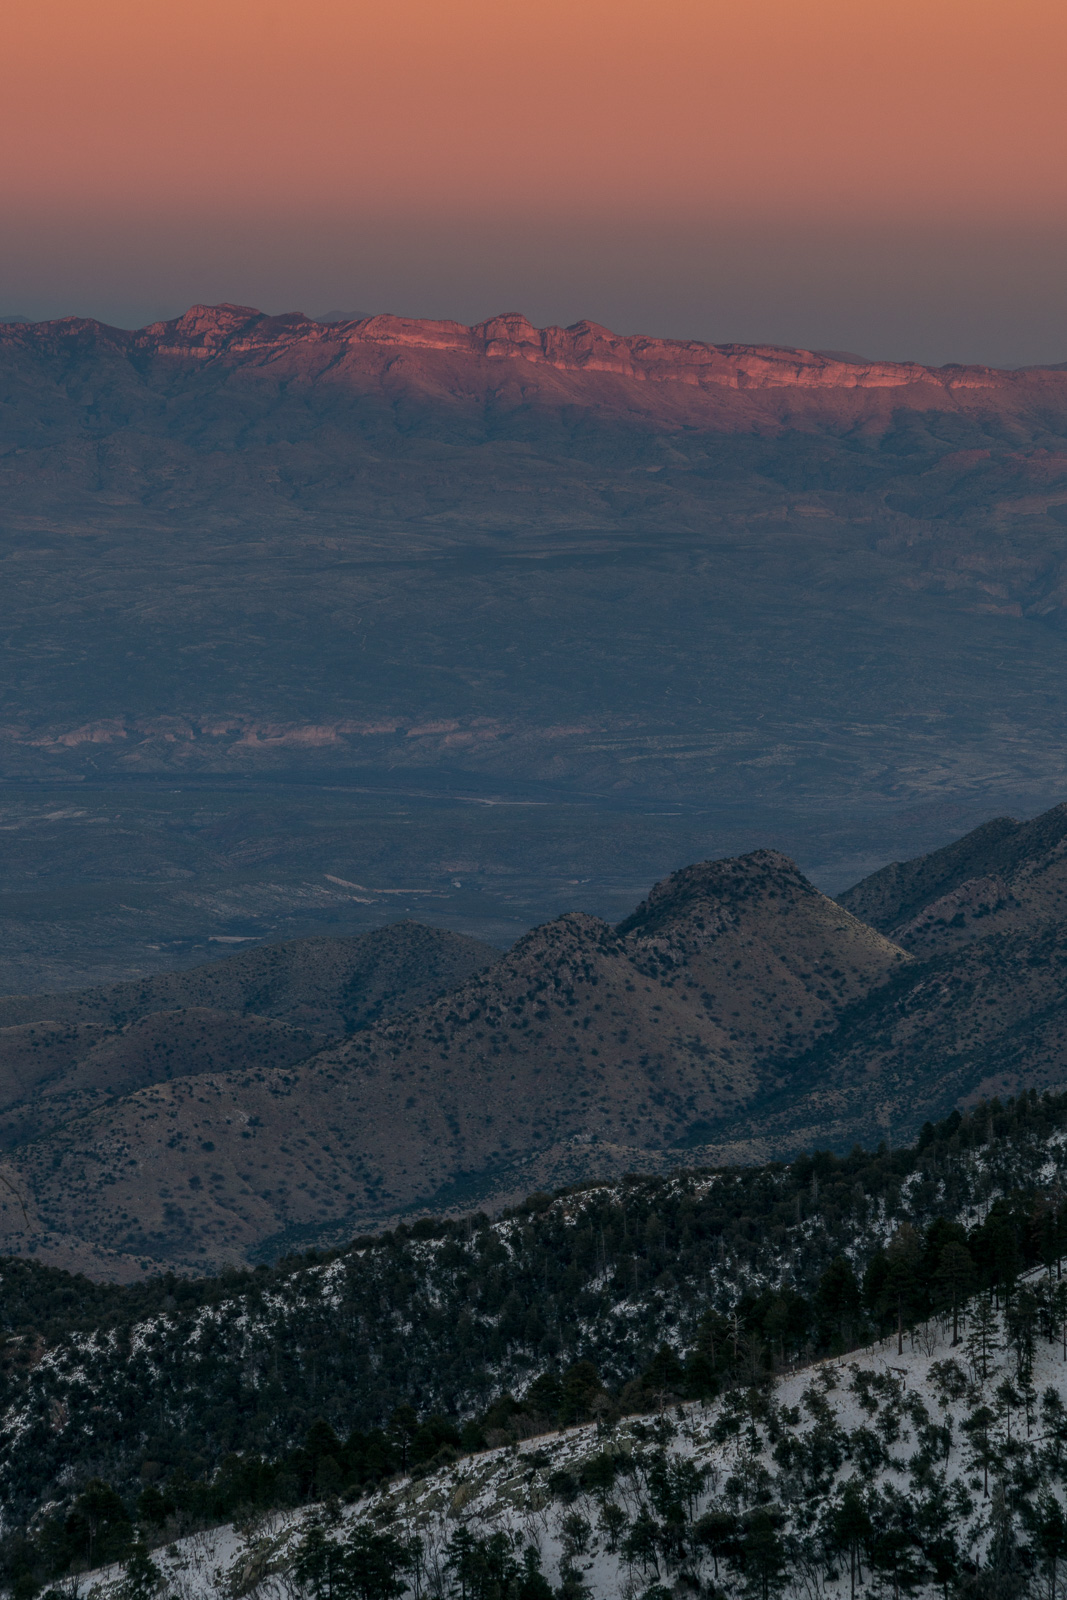 Last light on the Galiuro Mountains from the Box Elder Picnic Area. January 2017.